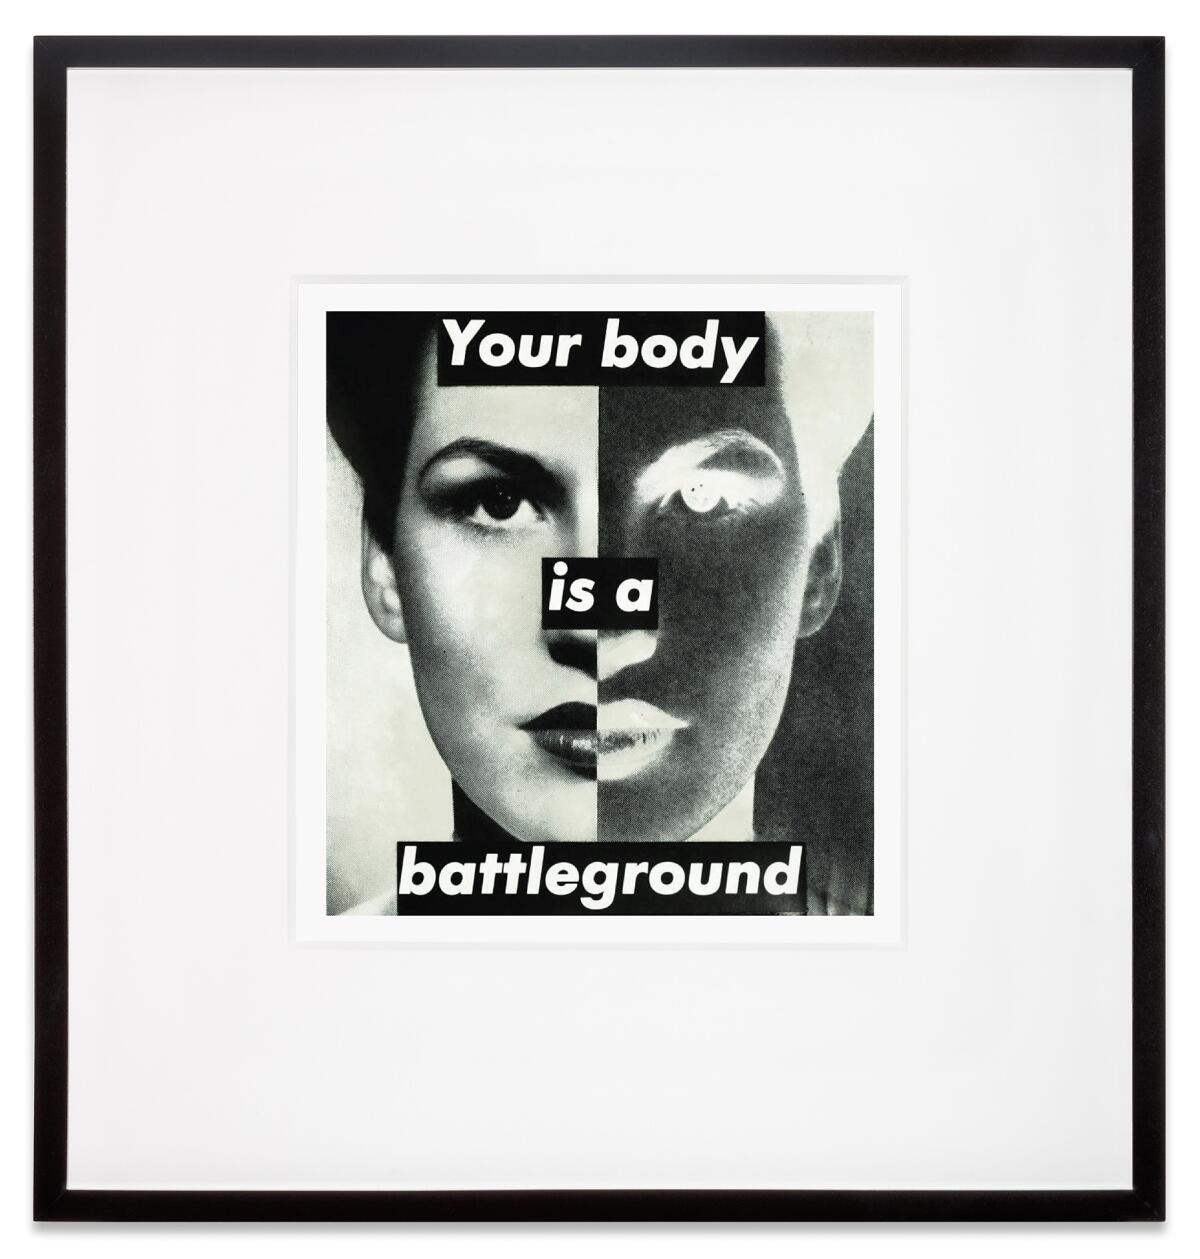 A black-and-white photo collage shows a woman's face split in two with "Your body is a battleground" in bold type.